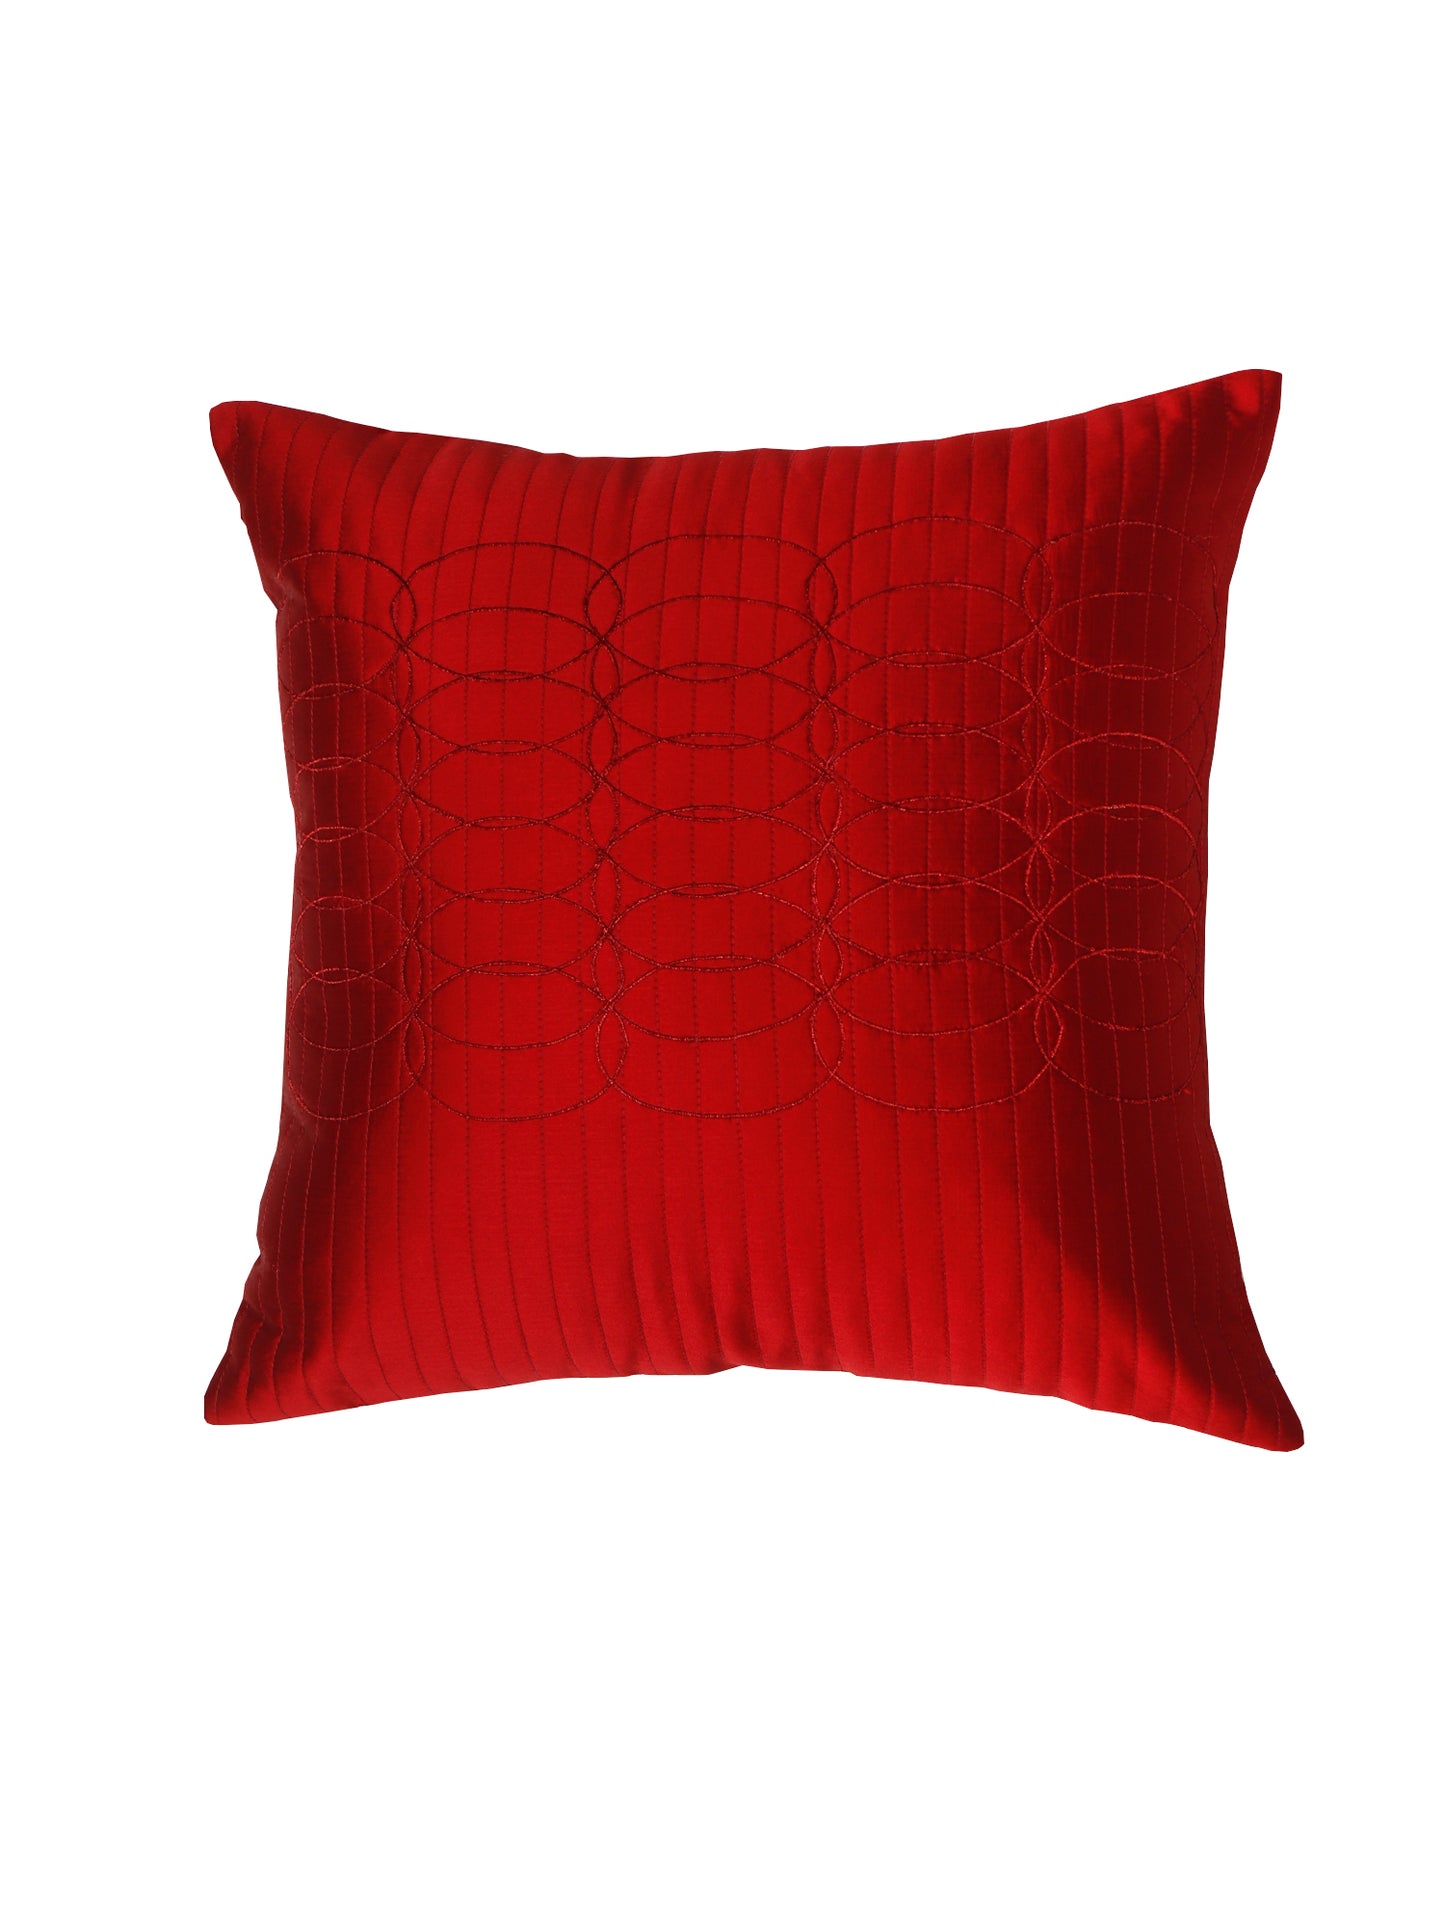 Cushion Cover Polyester Zari Embroidery with Self Quilting Red - 16"x 16"